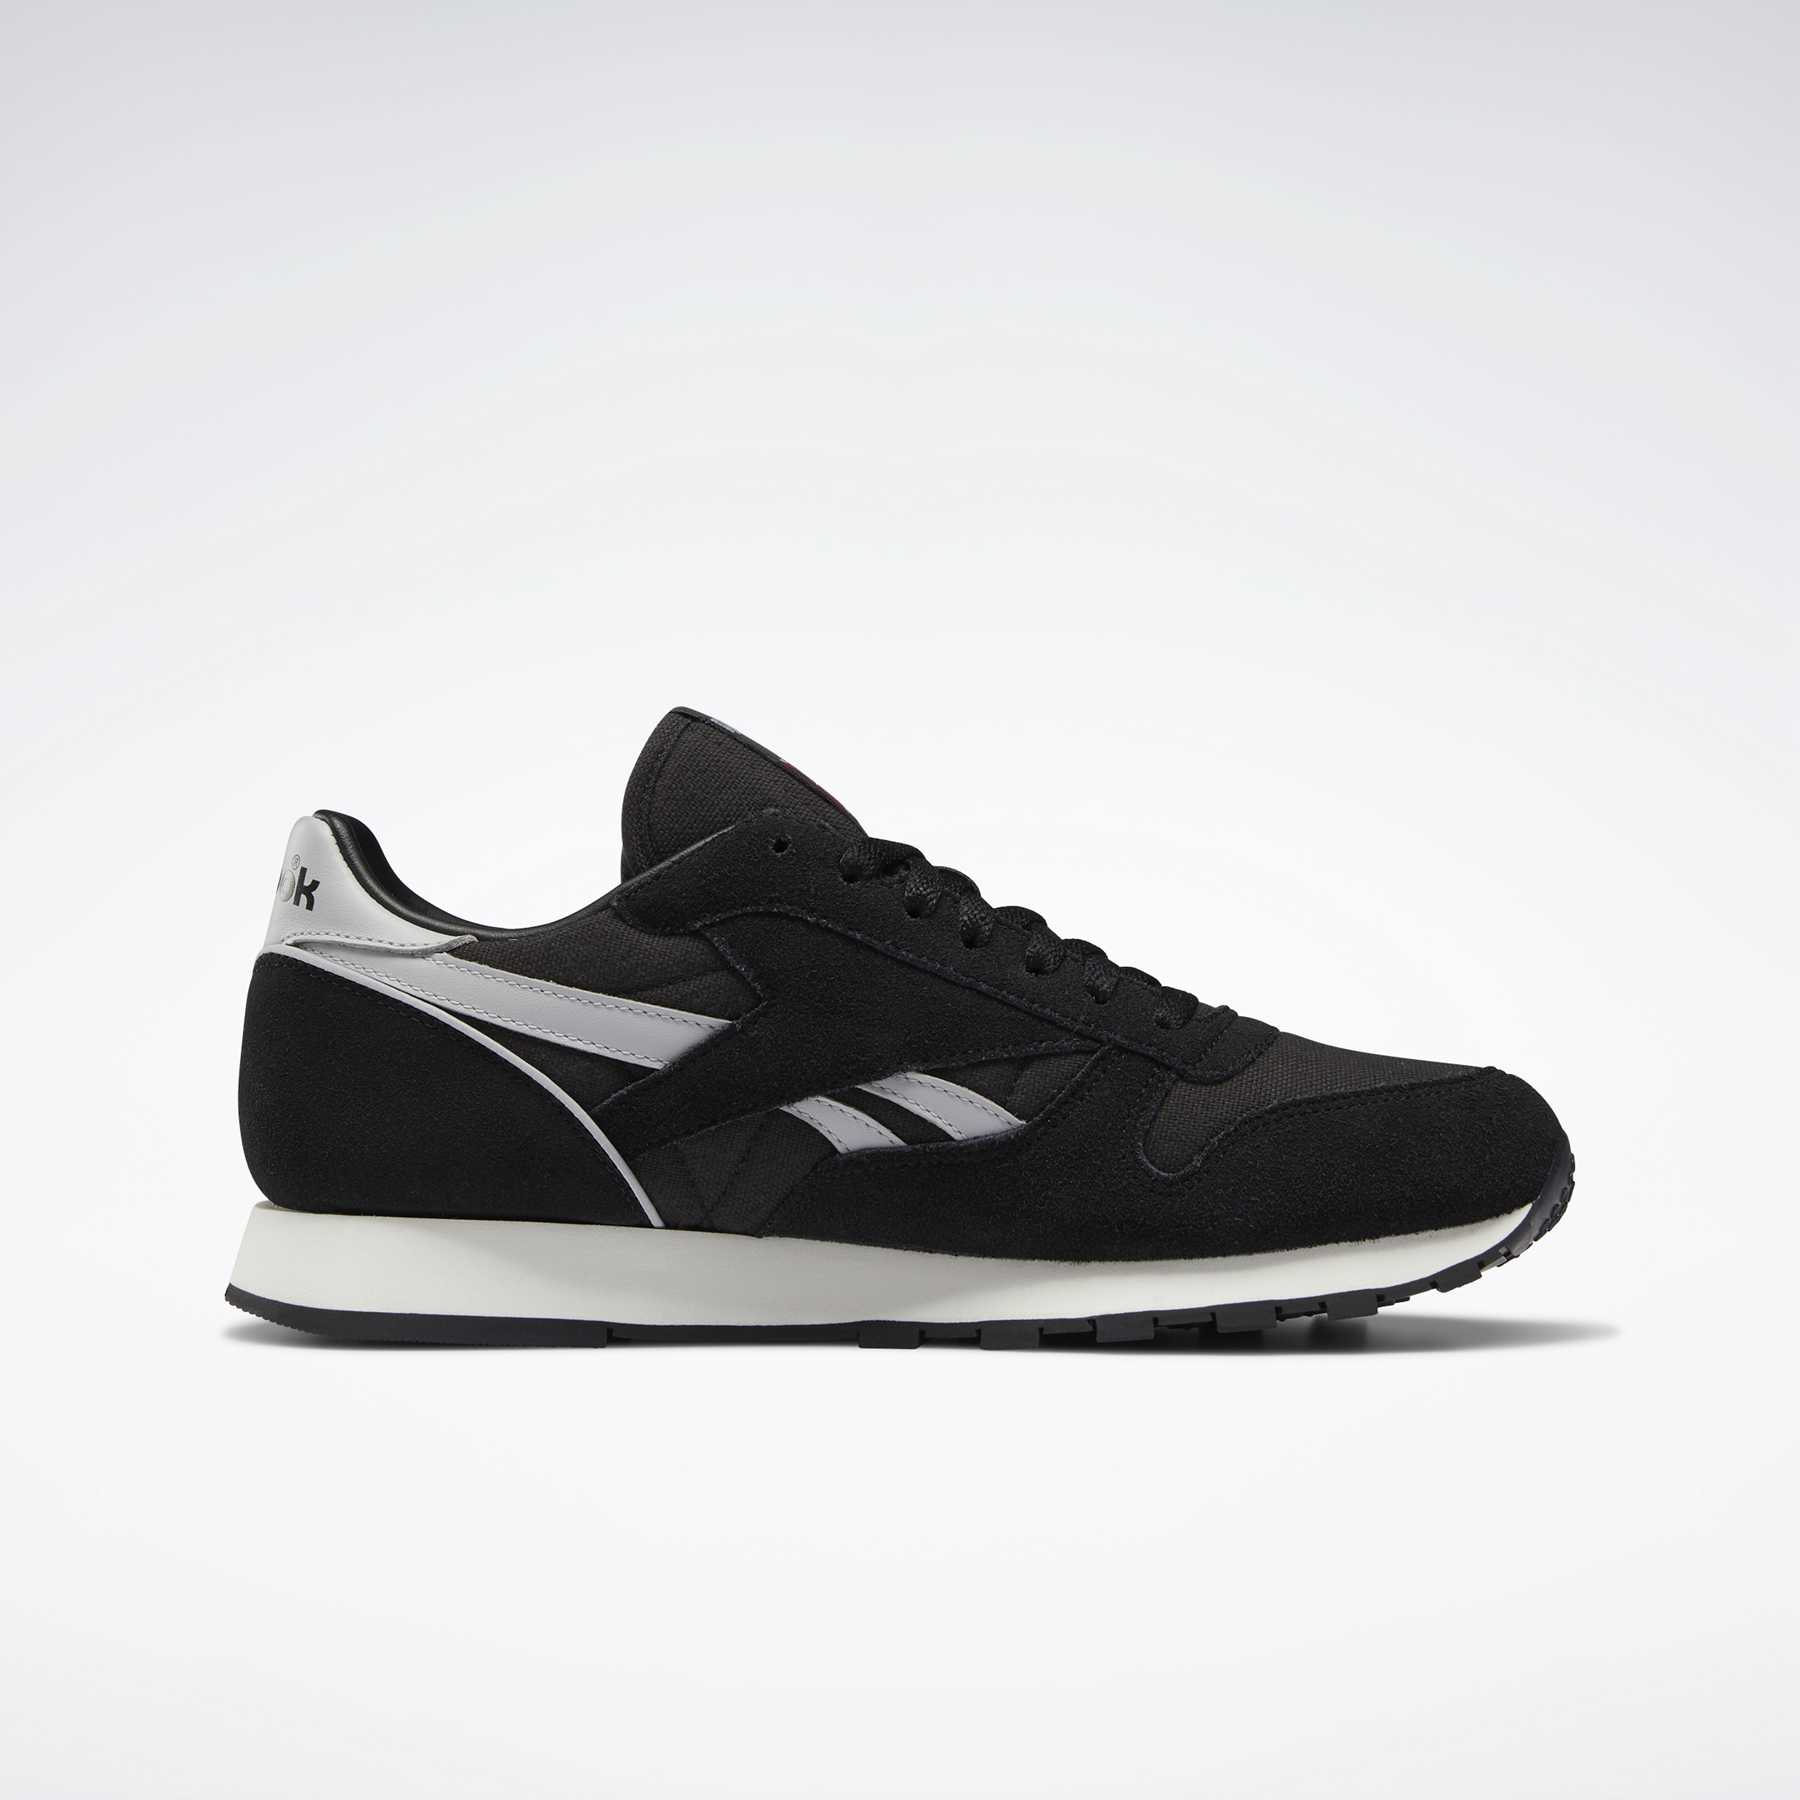 Reebok Classic Leather Gore-Tex Shoes